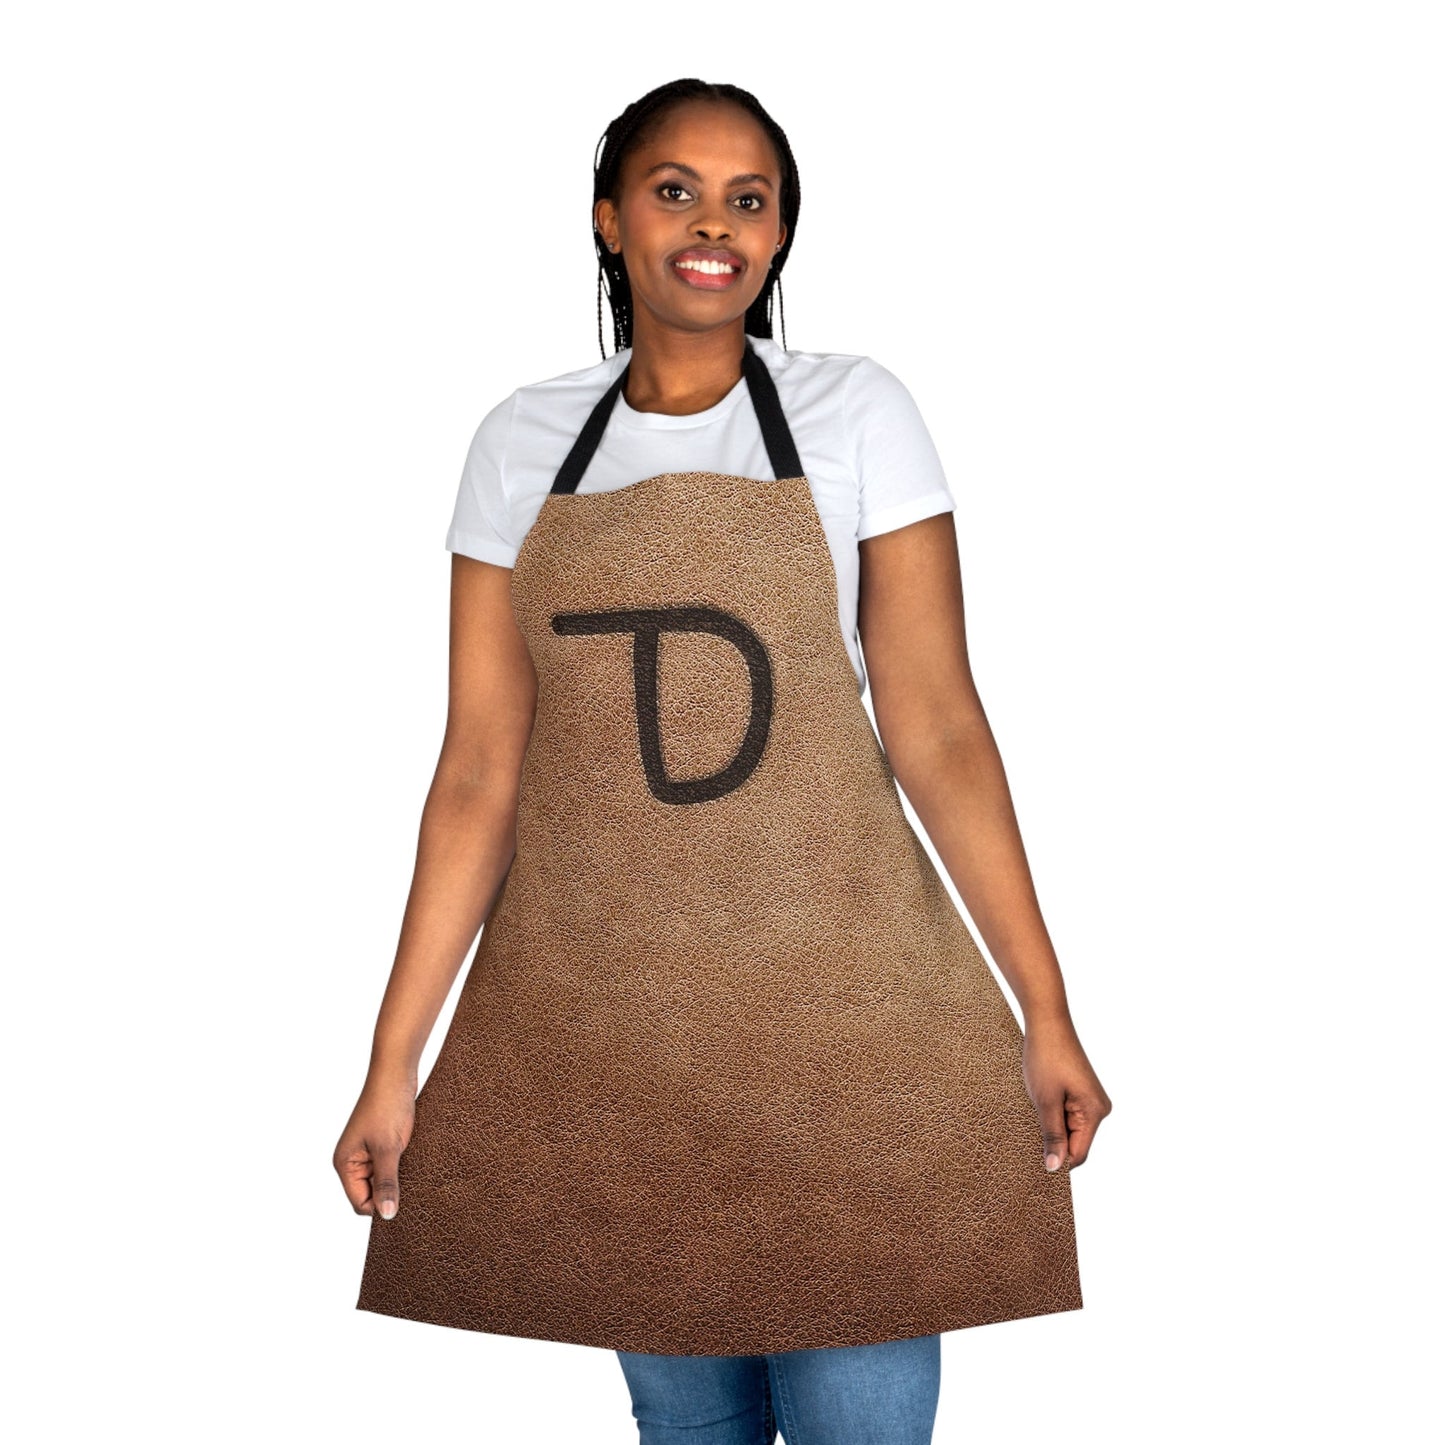 PERSONALIZED CATTLE BRAND Premium Canvas Apron Ranch or Farm Logo Apron Barbecue Grilling or Kitchen Apron with Livestock Brand